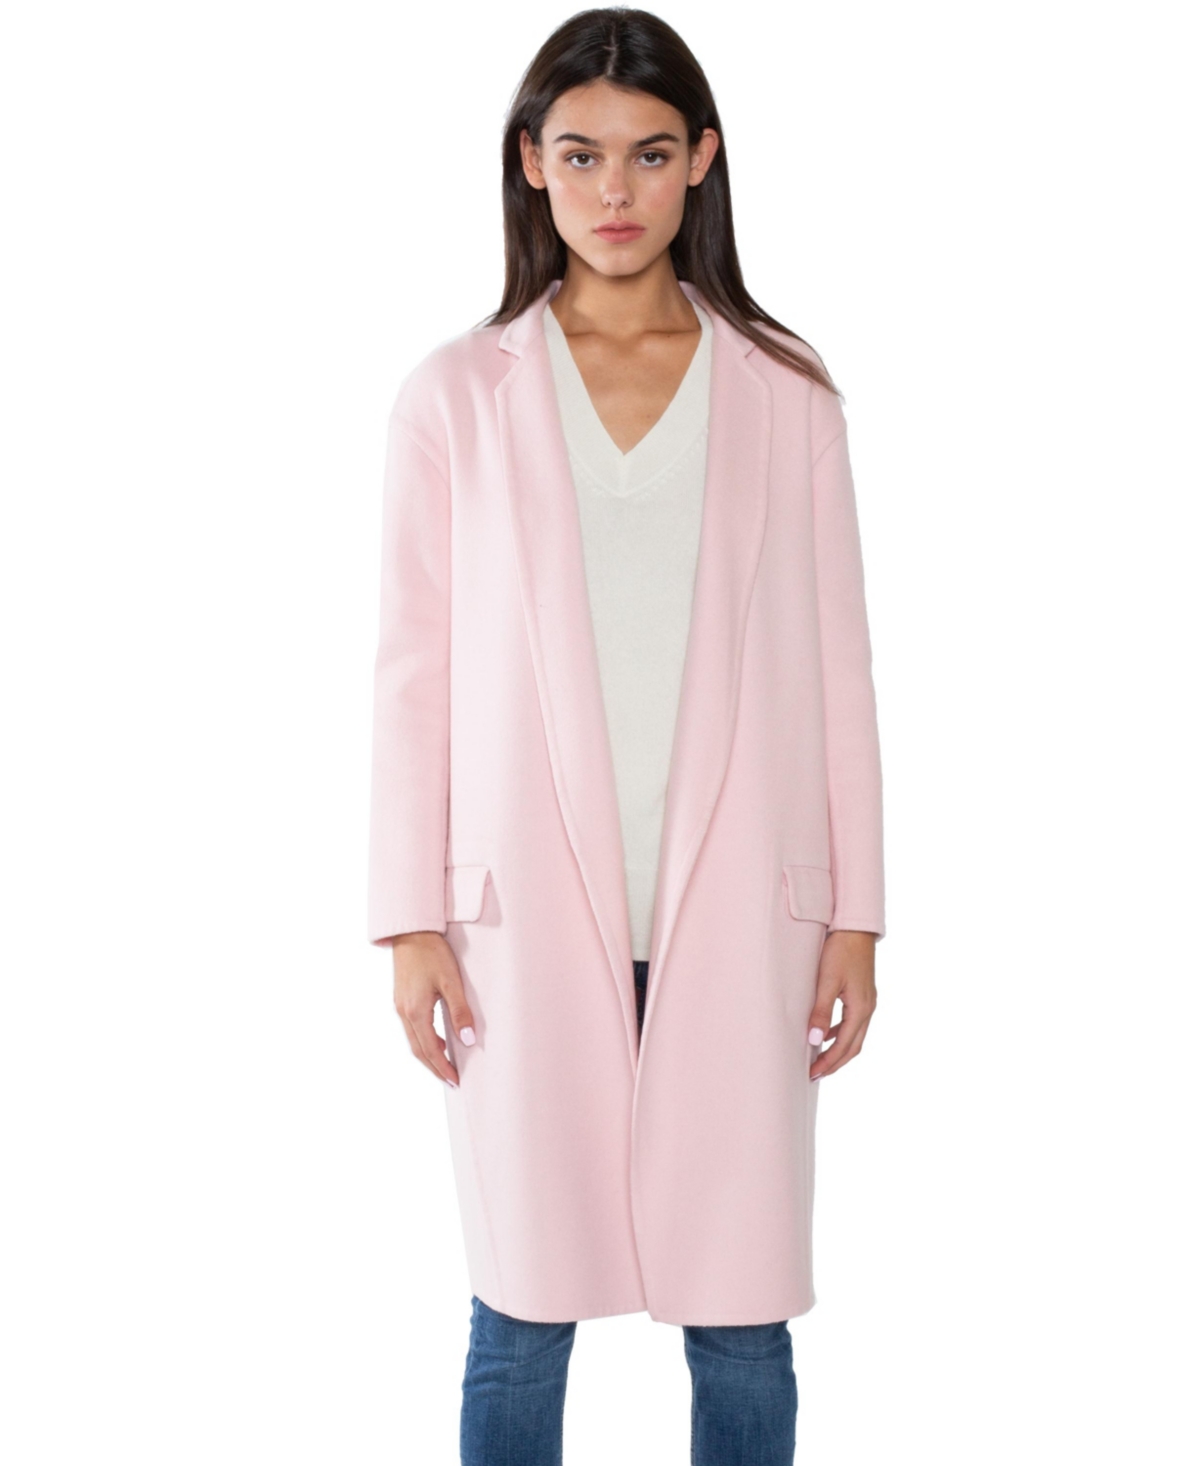 Women's Cashmere Wool Double-faced Lapel Overcoat - Pink